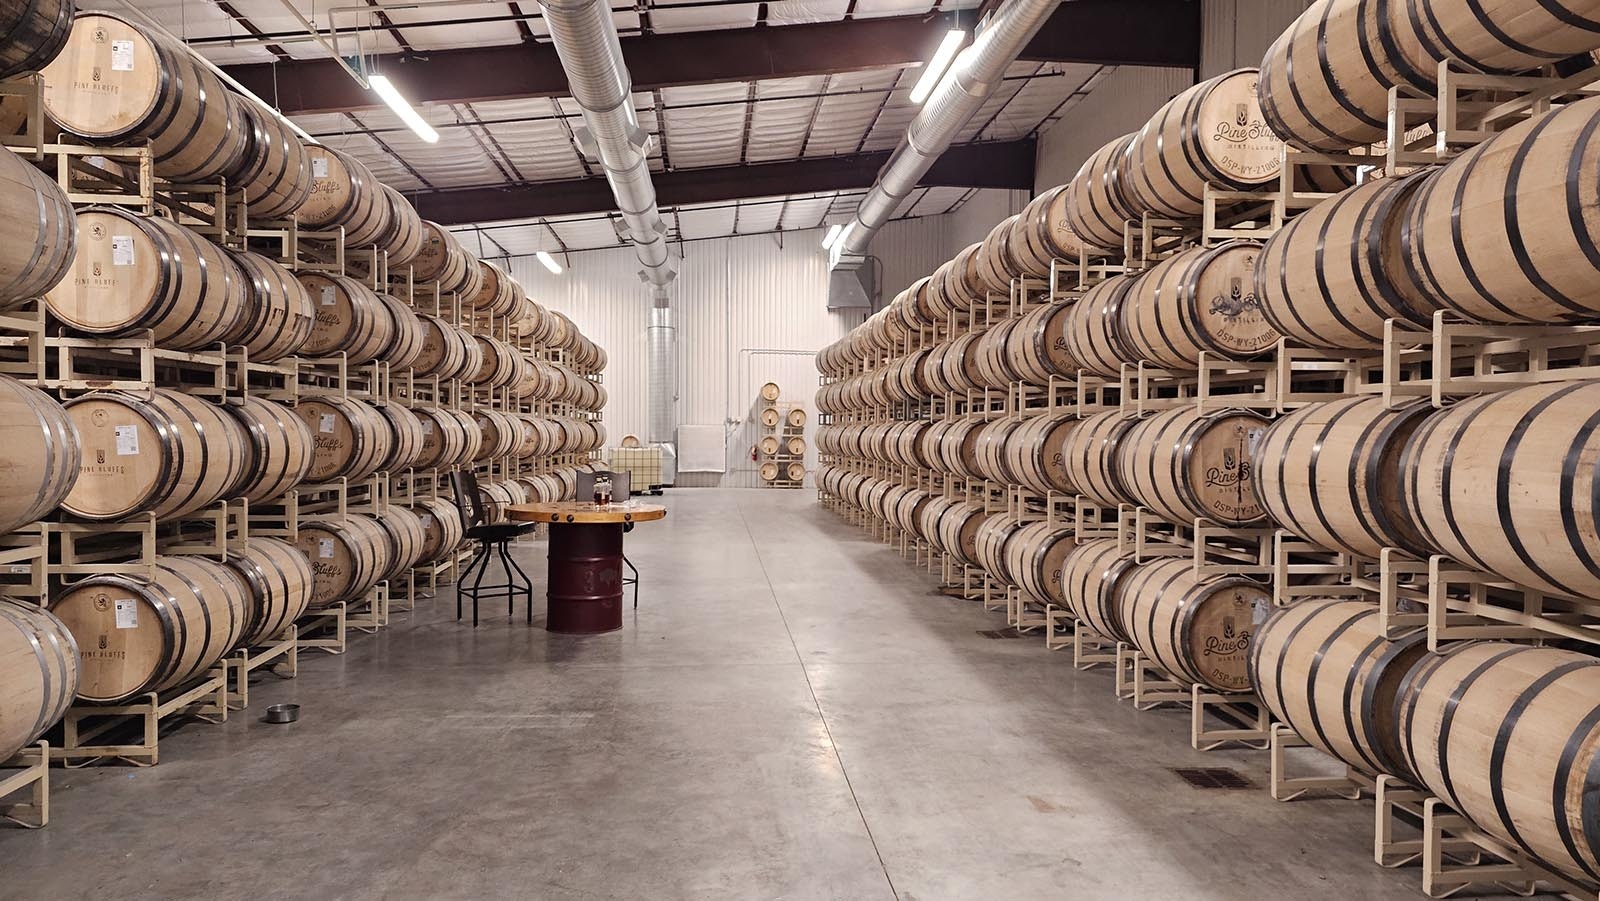 Pine Bluffs Distillery has 1,300 barrels of whiskey and bourbon slowing aging in oak barrels that have been charred with fire. Evaporation over the four-year aging period will take some of that whiskey to the heavens. That's known as the angel's share.